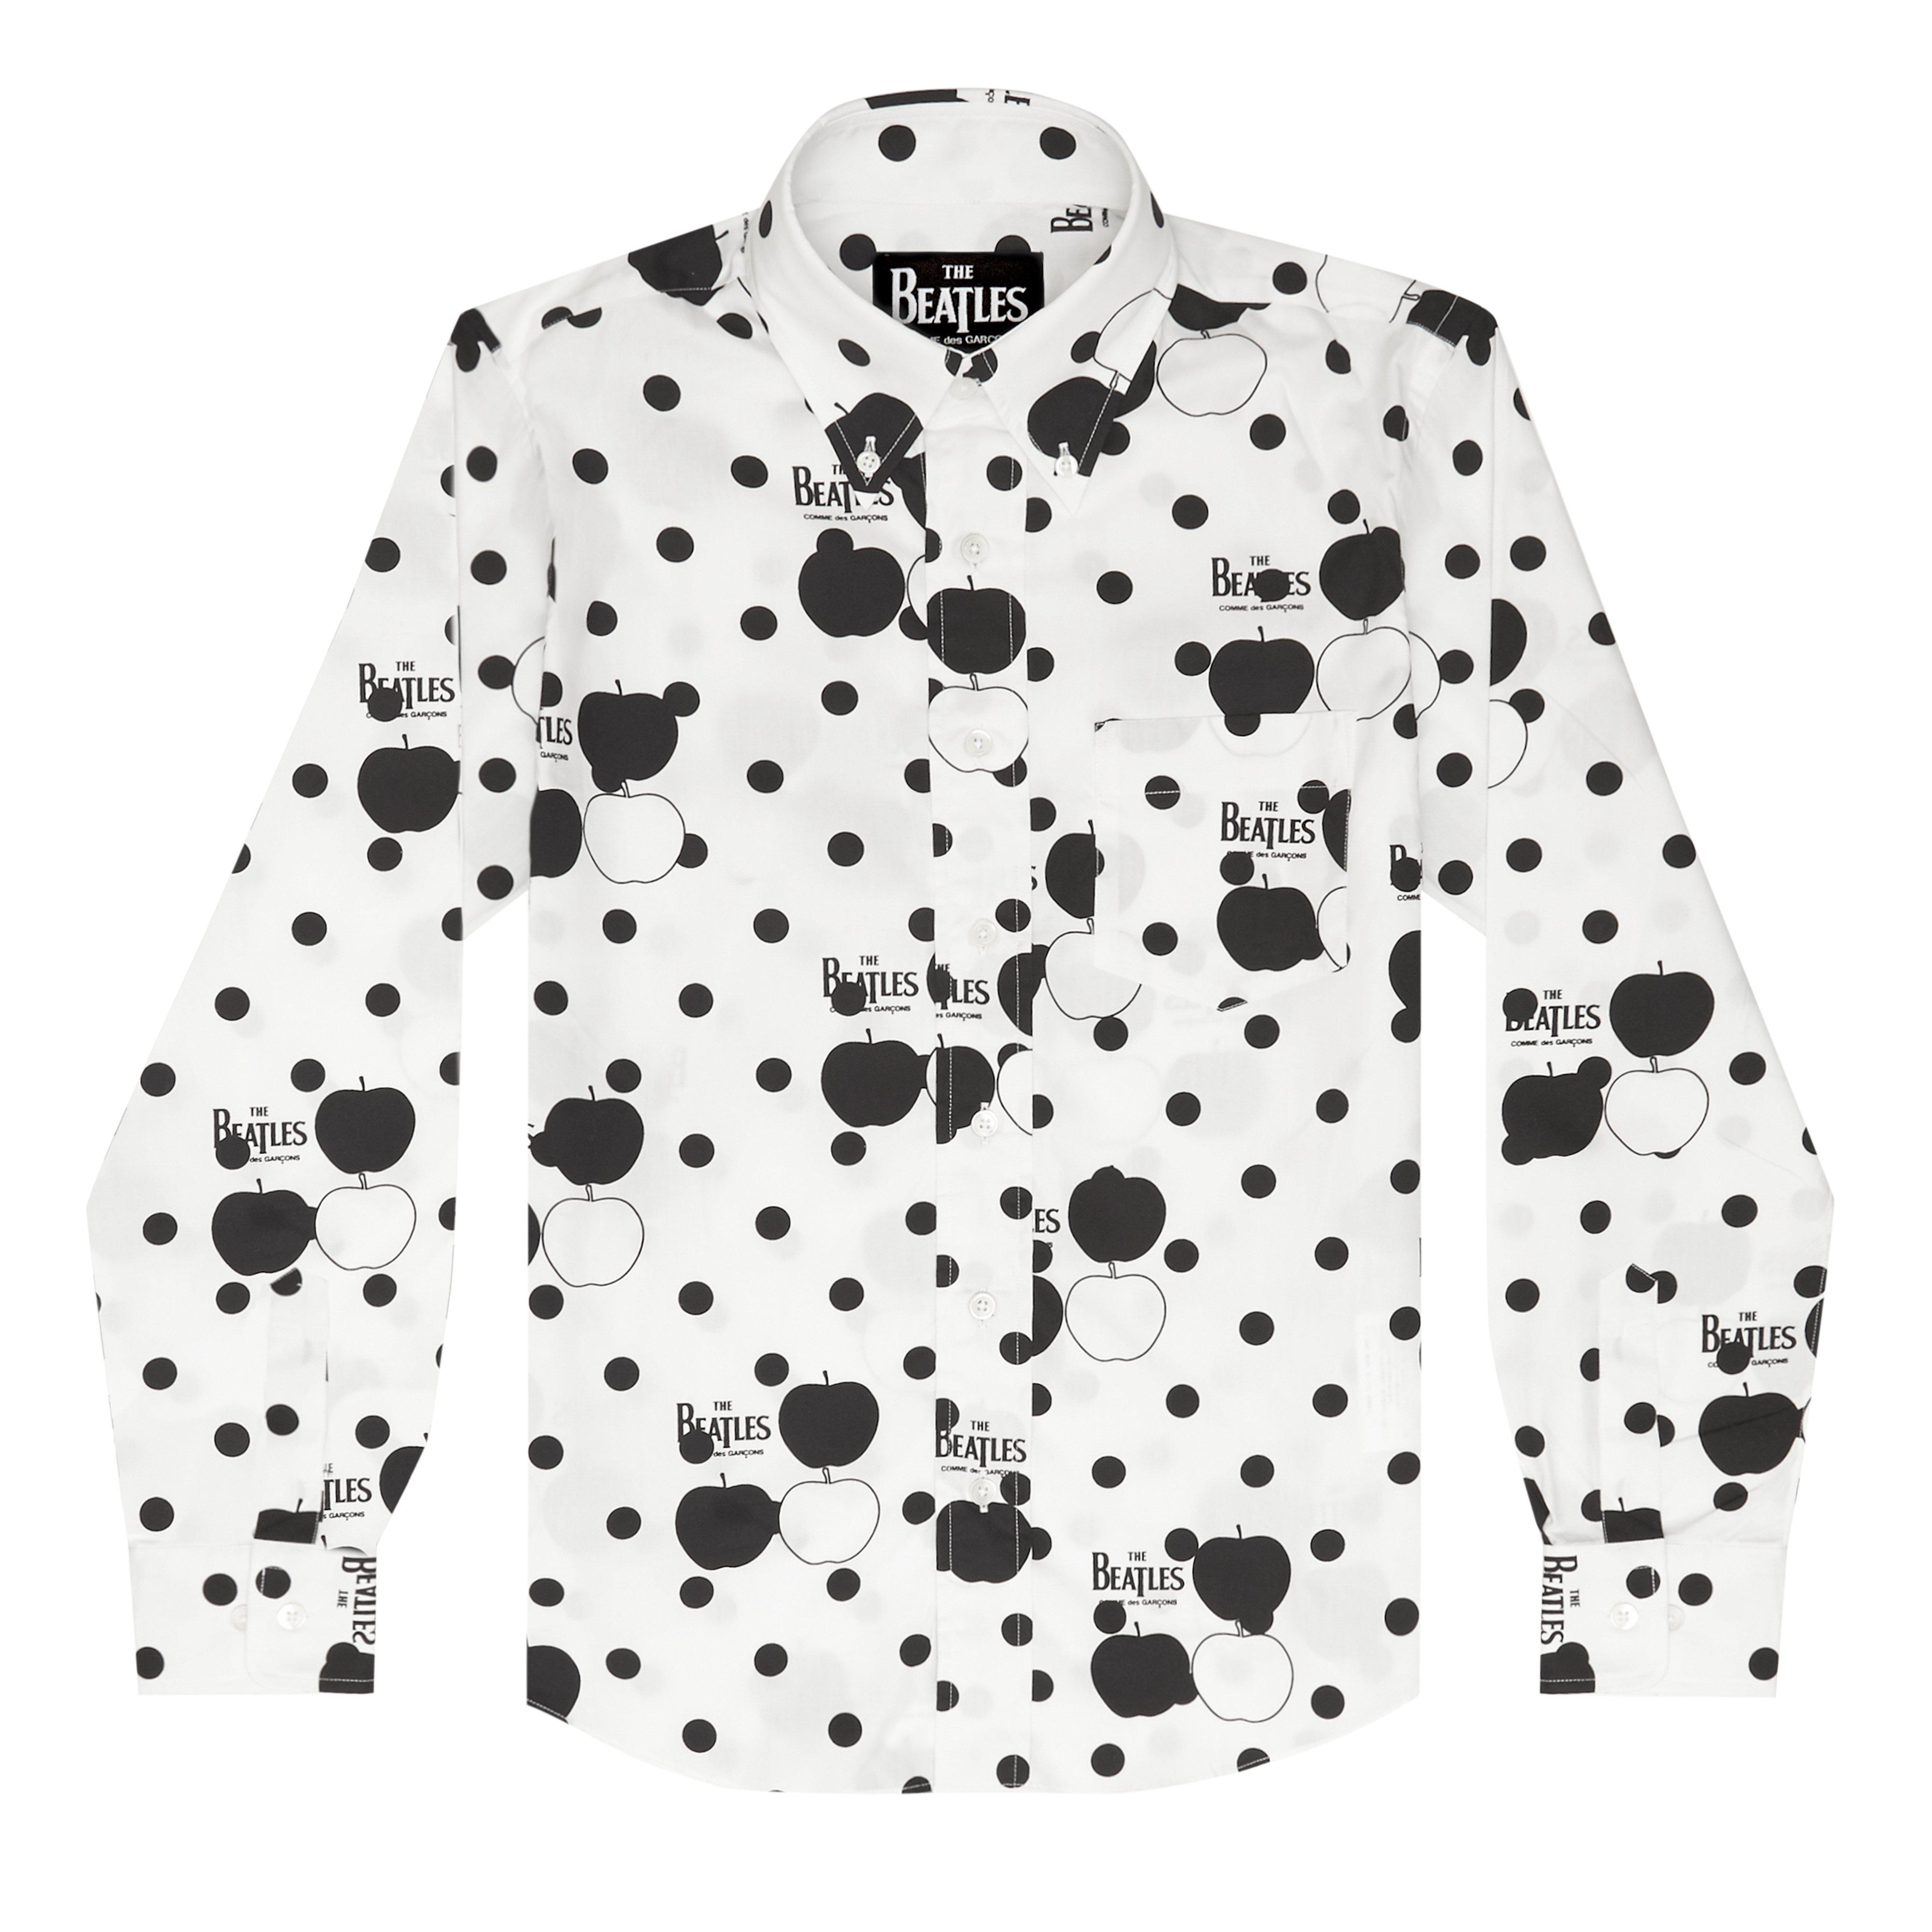 CDG x The Beatles Shirt (White with Black/White Apples) by COMME DES GARCONS X BEATLES